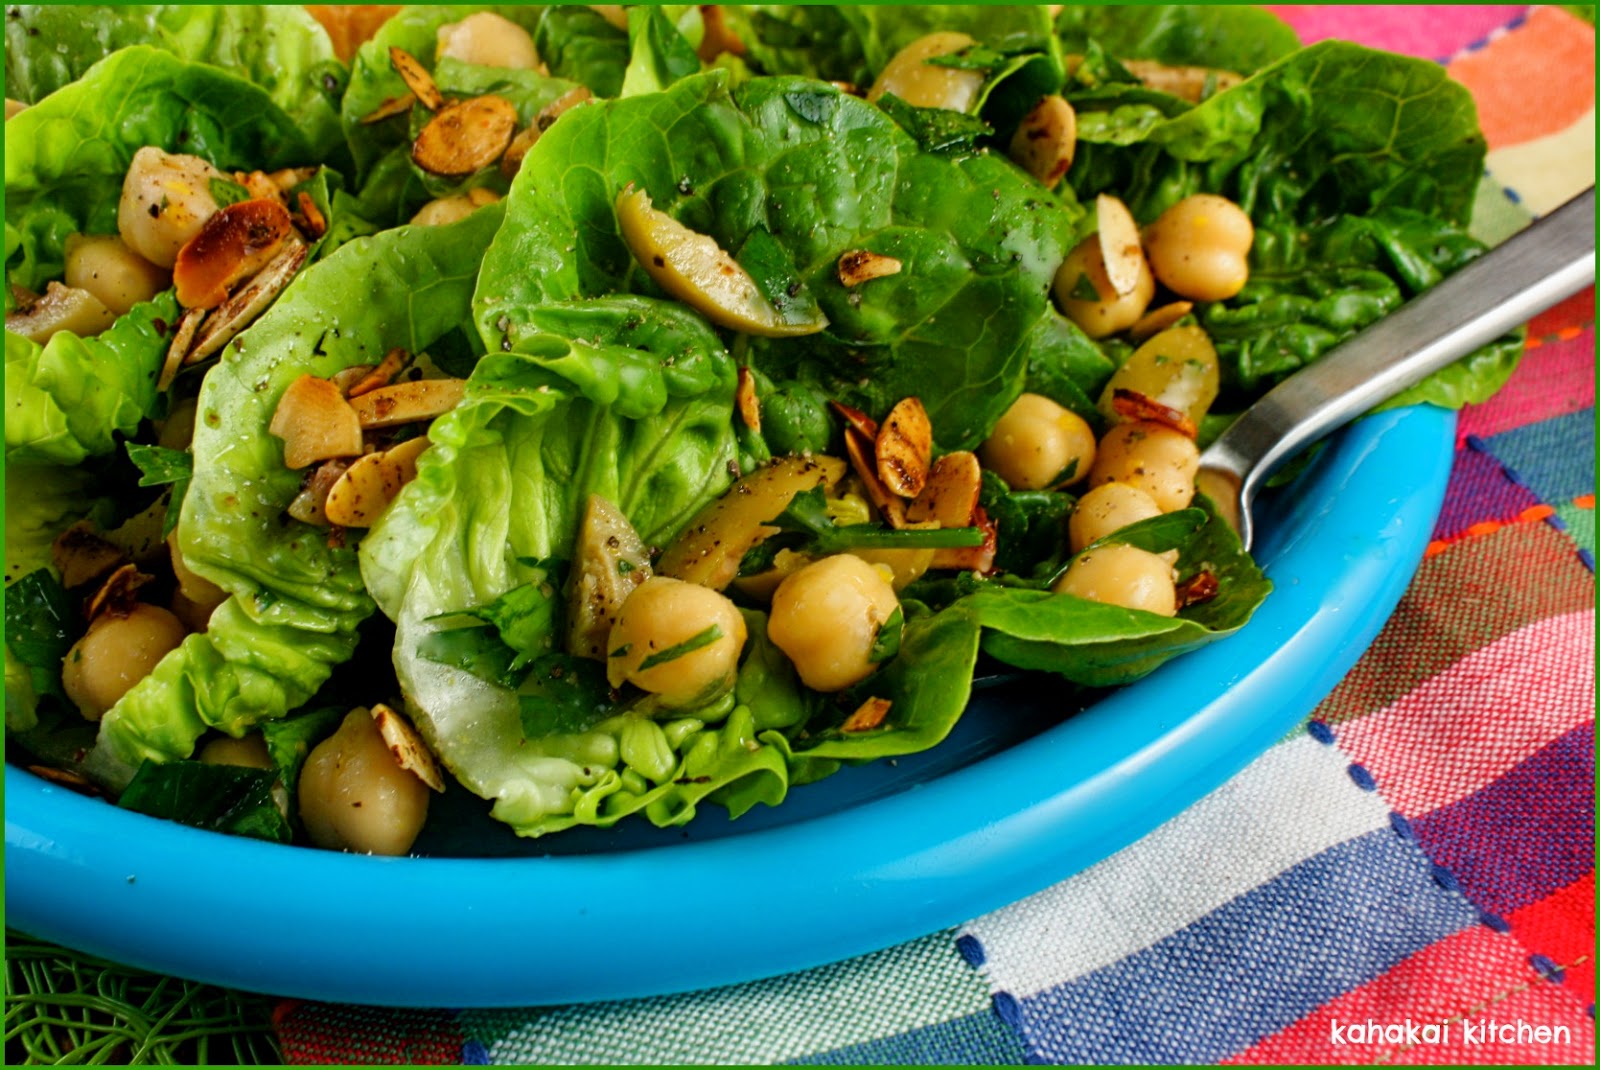 Kahakai Kitchen: A Spring Salad of Baby Lettuce, Green Olives and Lemon Oil  (with Chickpeas & Spiced Almonds)